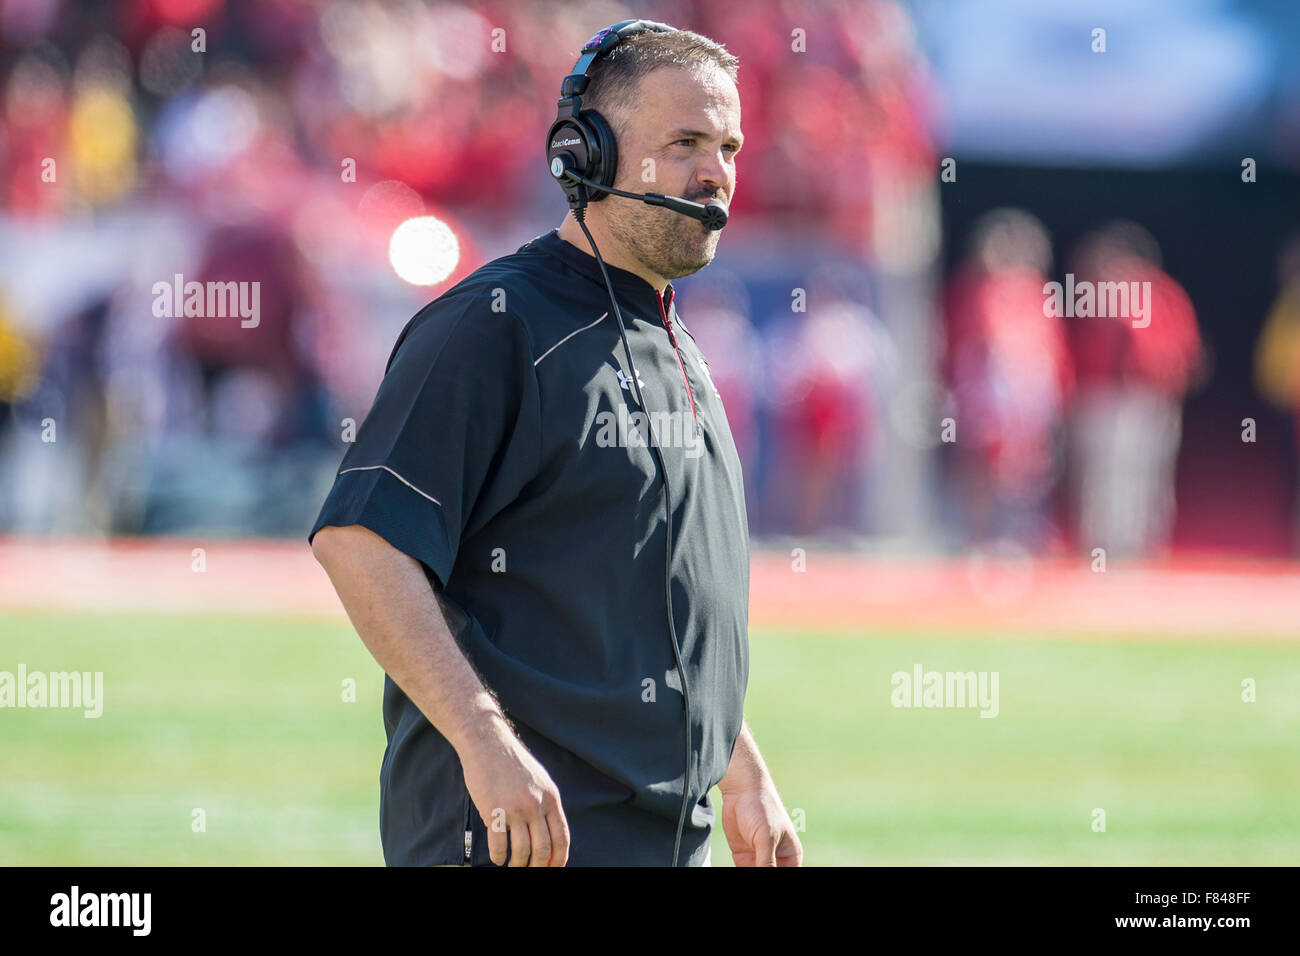 Houston, TX, USA. 5th Dec, 2015. Temple Owls head coach Matt Rhule during the 2nd quarter of the American Athletic Conference championship NCAA football game between the Temple Owls and the University of Houston Cougars at TDECU Stadium in Houston, TX.Trask Smith/CSM/Alamy Live News Stock Photo